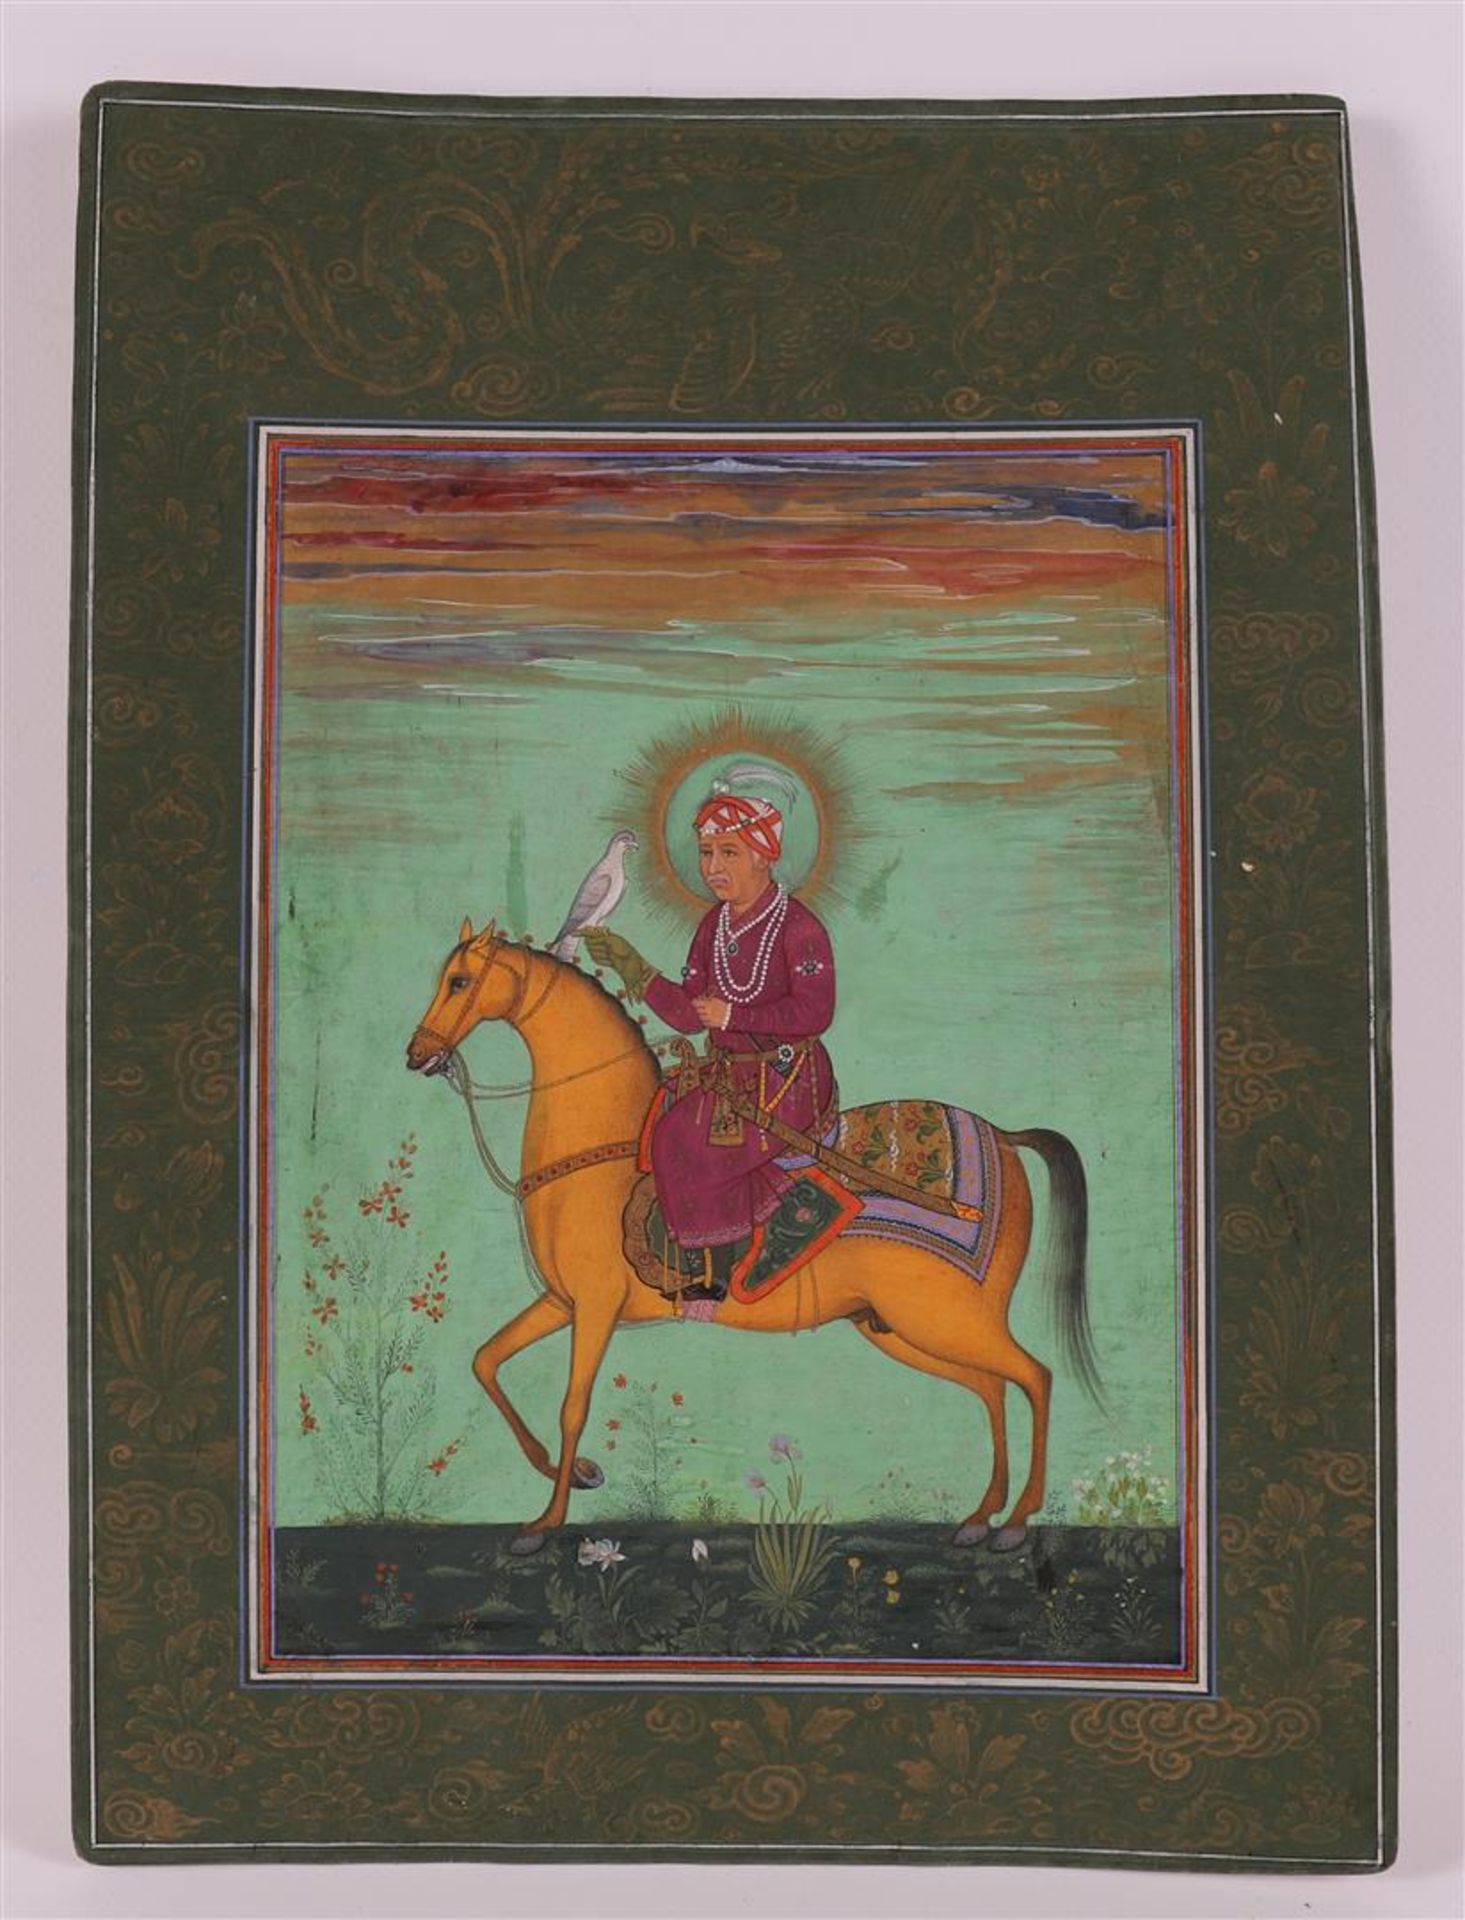  'Portrait of Akbar the Great, the third Mughal emperor', 19th/20th century